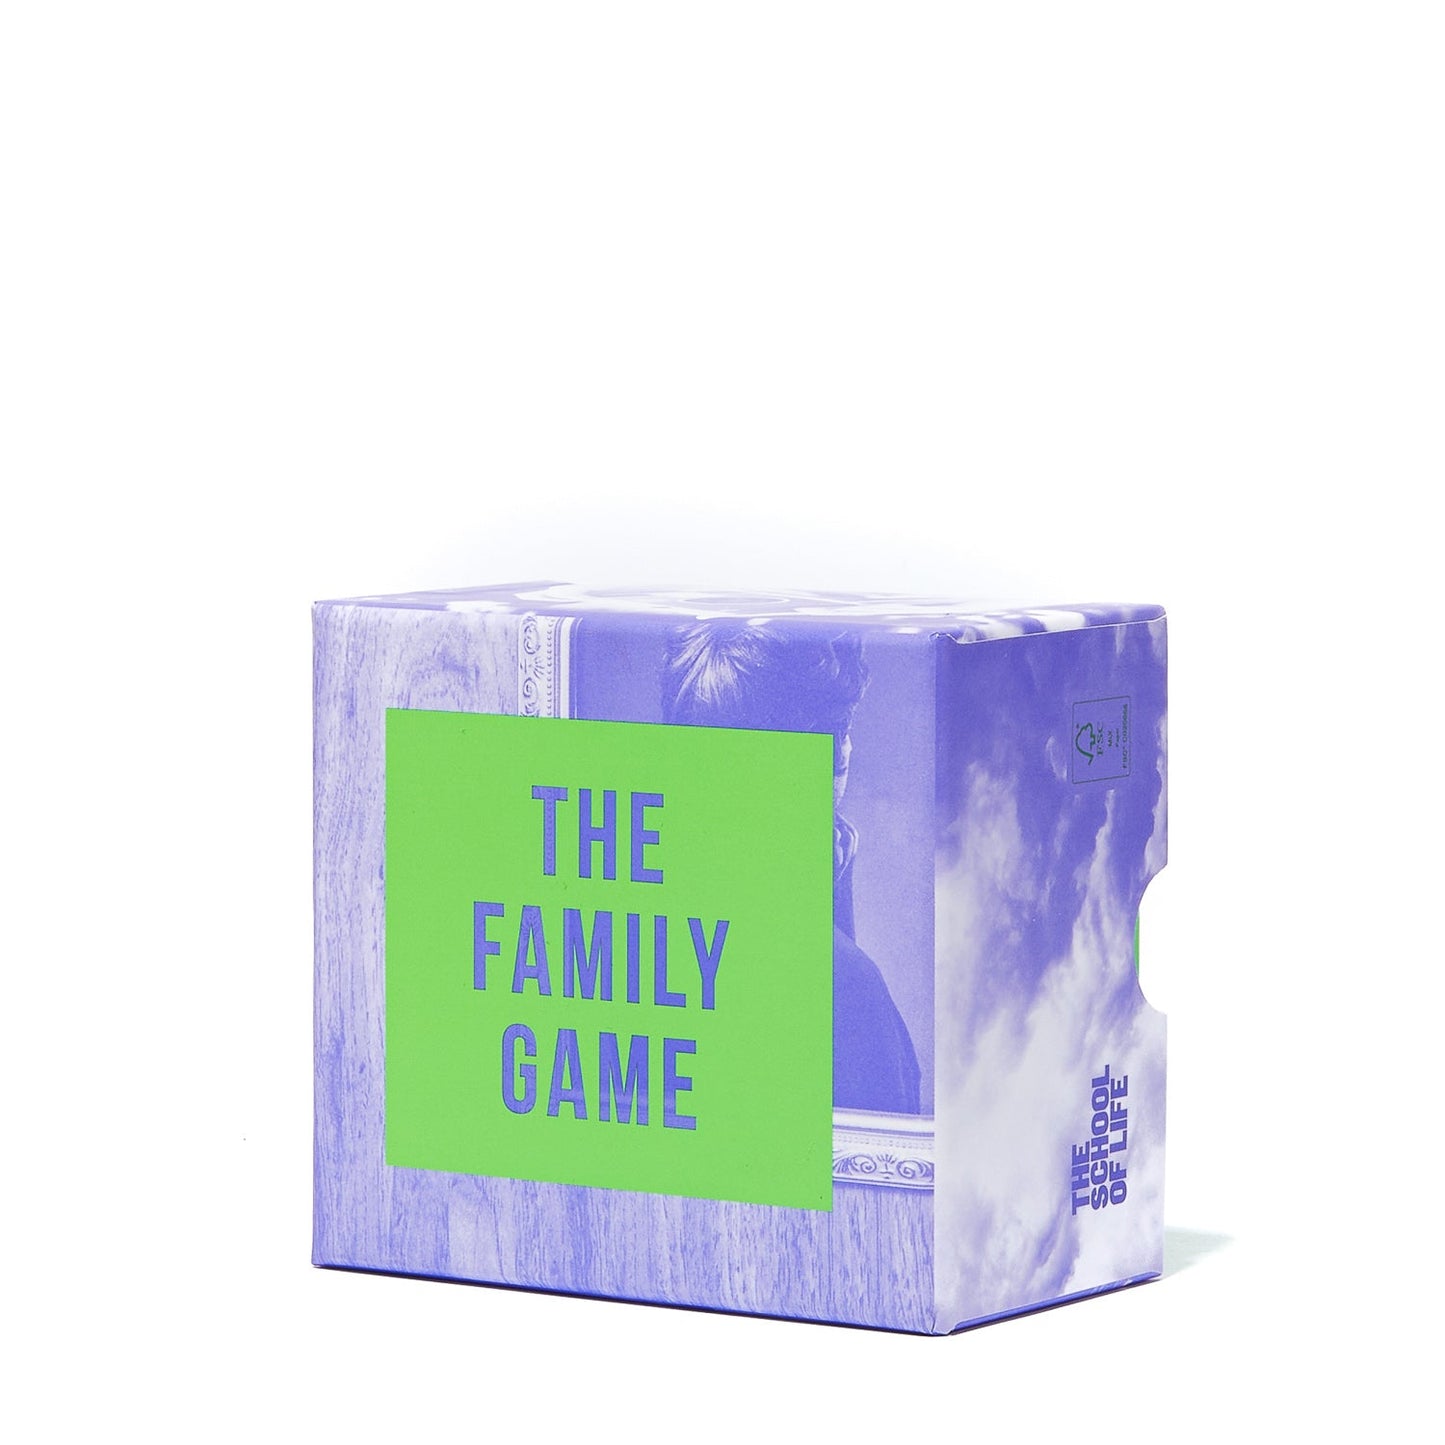 THE FAMILY GAME